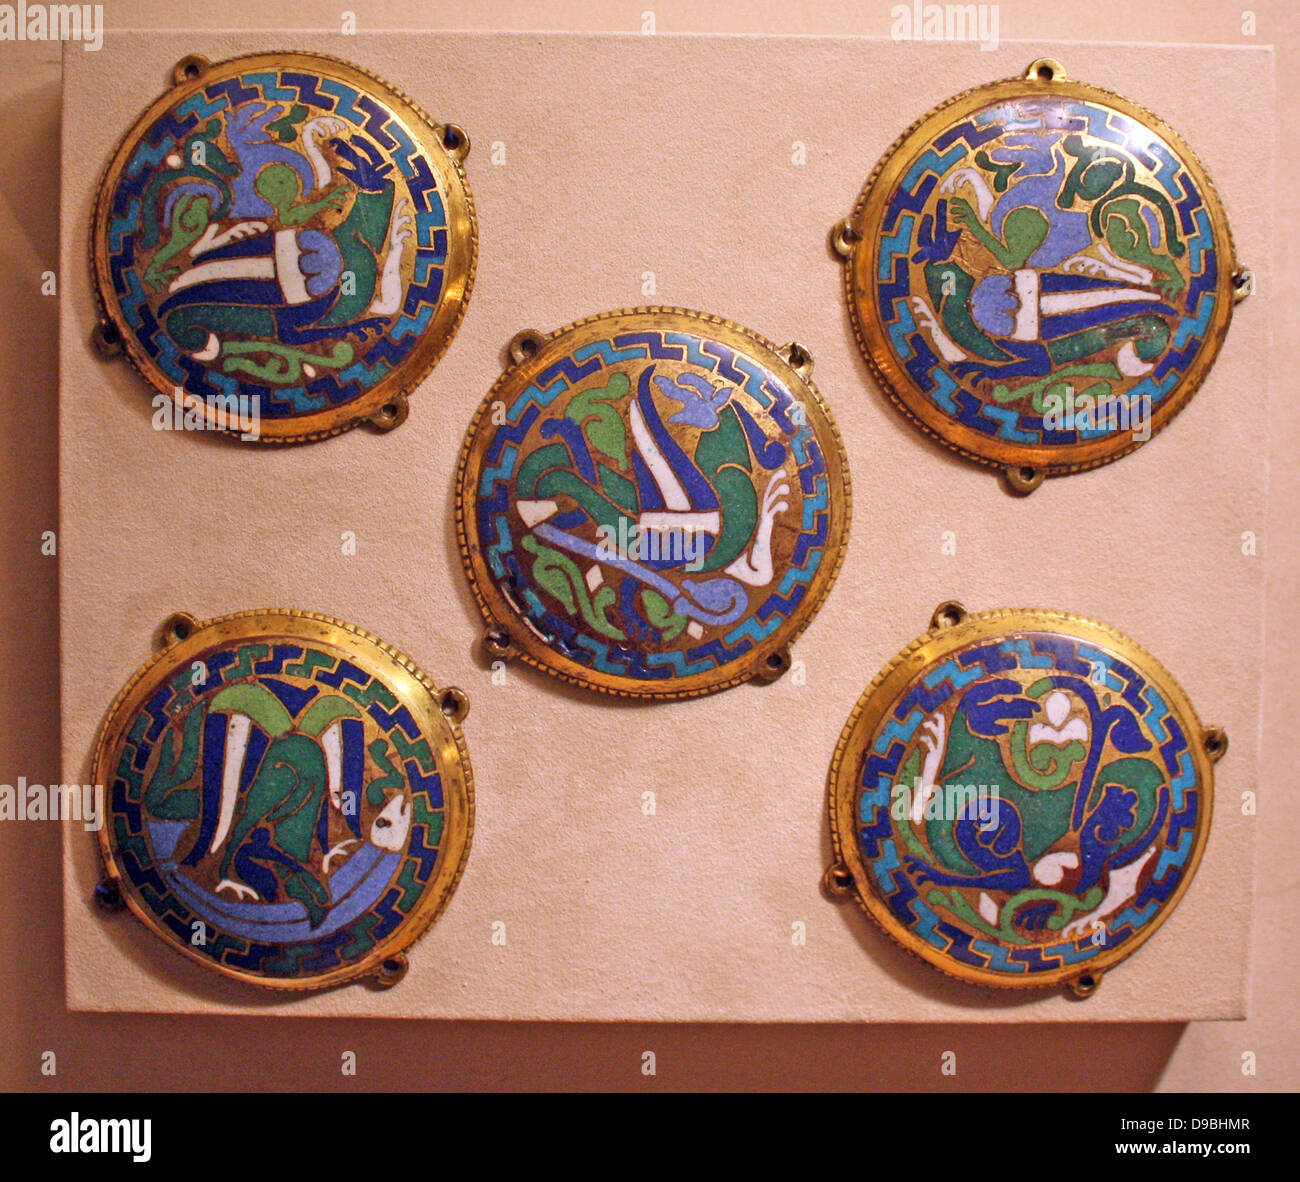 Five Medallions from a Coffret.  Champleve enamel on gilded copper.  French, Conques.  Made about 1110-30  The blue and green beasts, locked in battle and compressed into these circular medallions are emblematic of goldsmiths' work created at Conques under the patronage of Abbot Boniface. Stock Photo